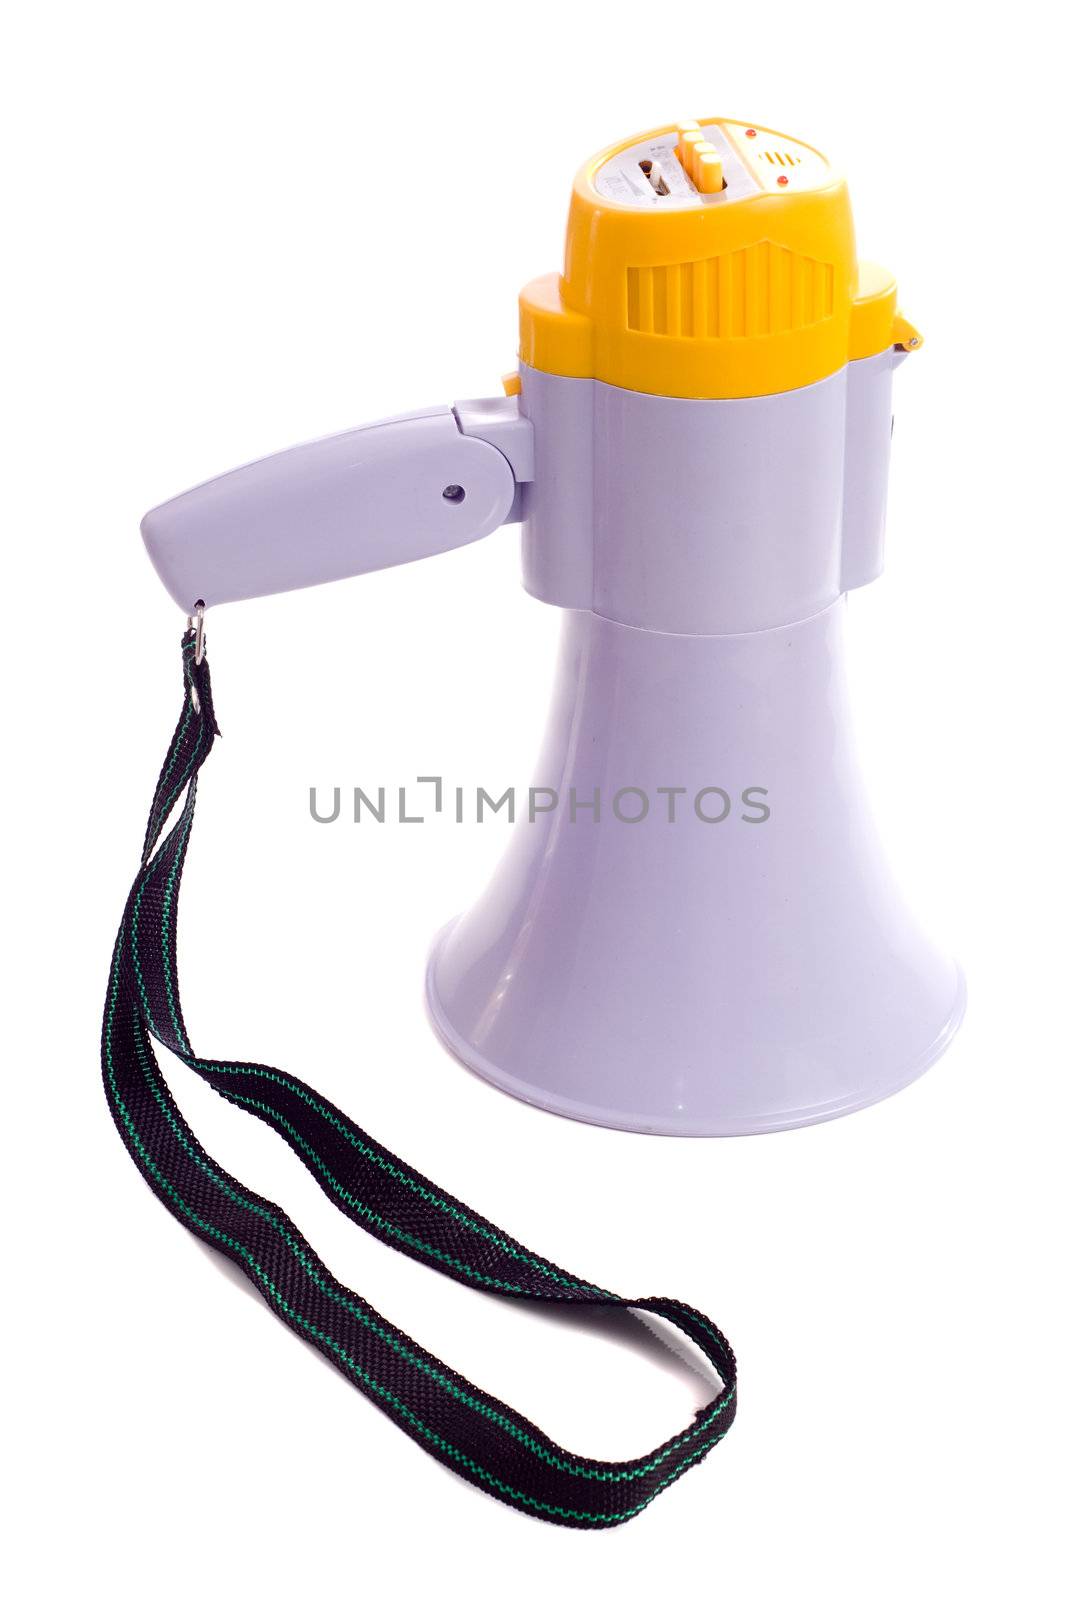 A plastic megaphone isolated against a white background